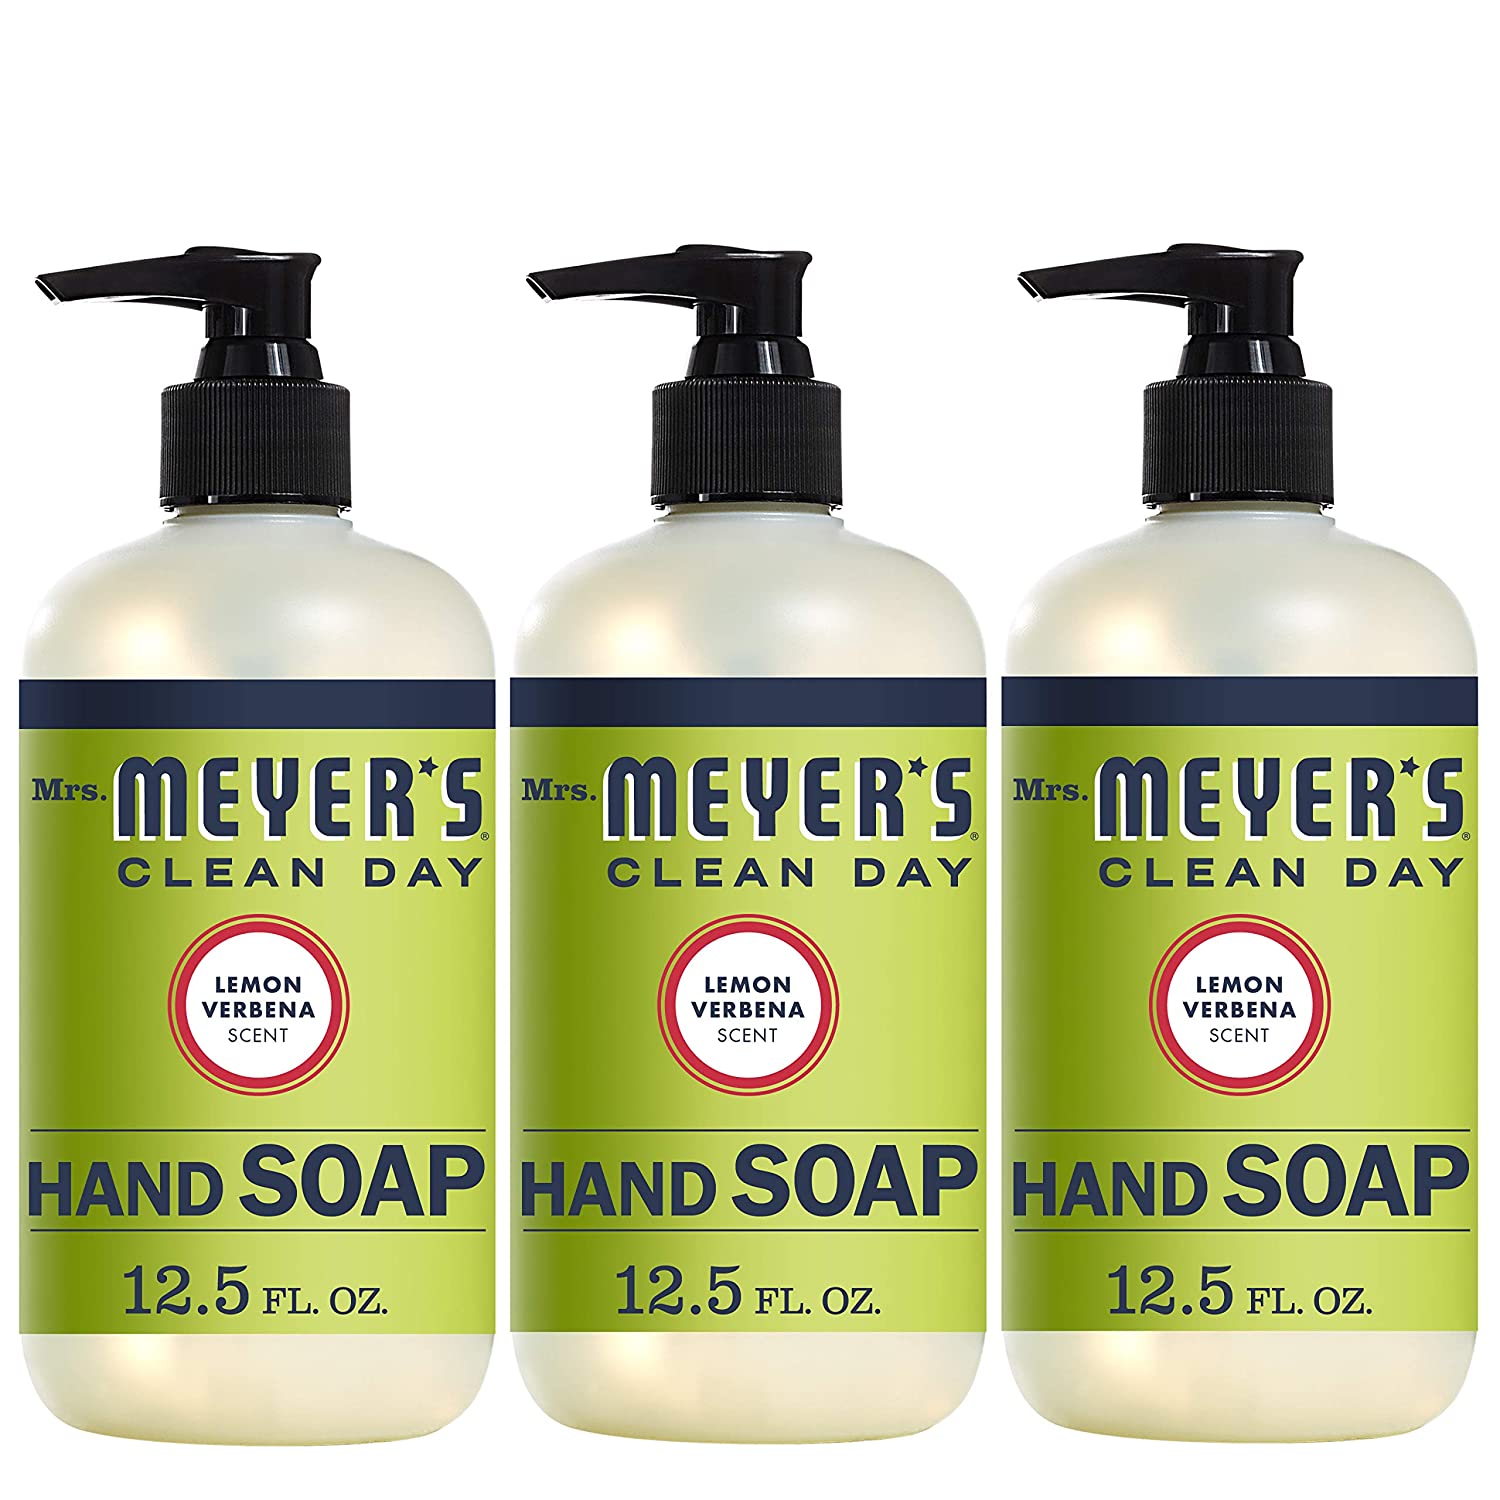 Mrs. Meyer’s Aromatherapy Chemical-Free Hand Soap, 3-Pack